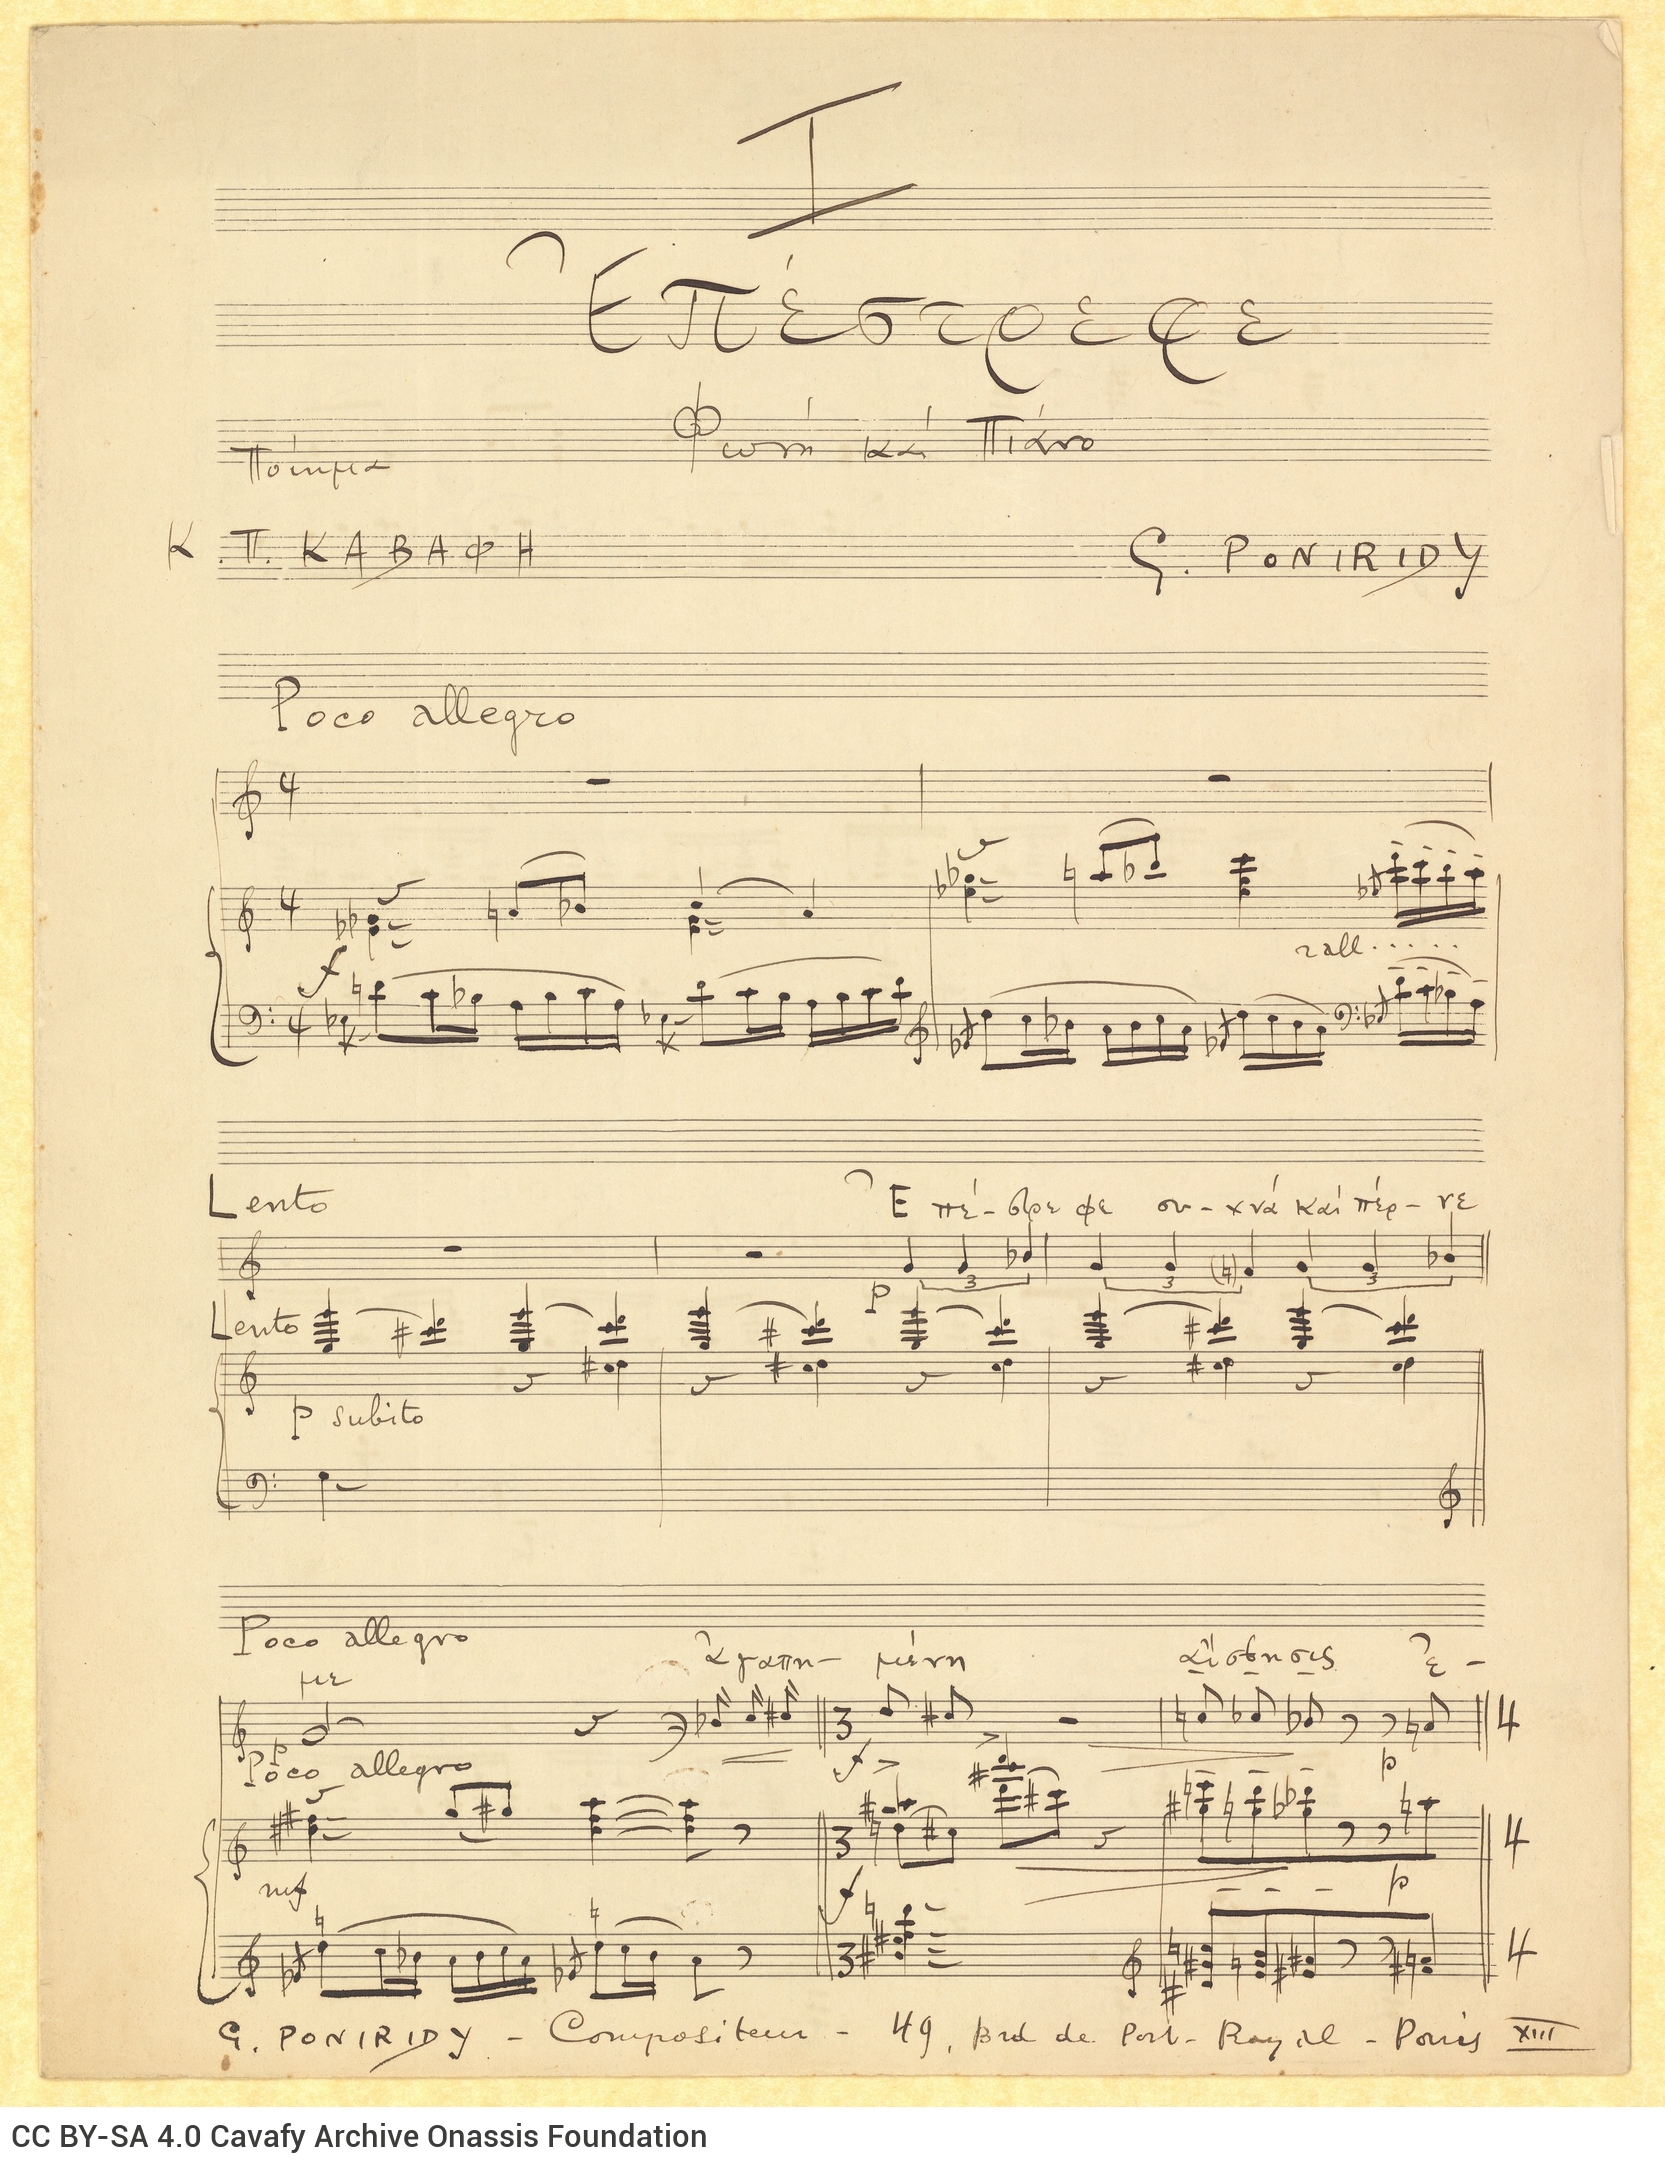 Handwritten musical score on the three pages of a double sheet notepaper. Composition for voice and piano, based on the po